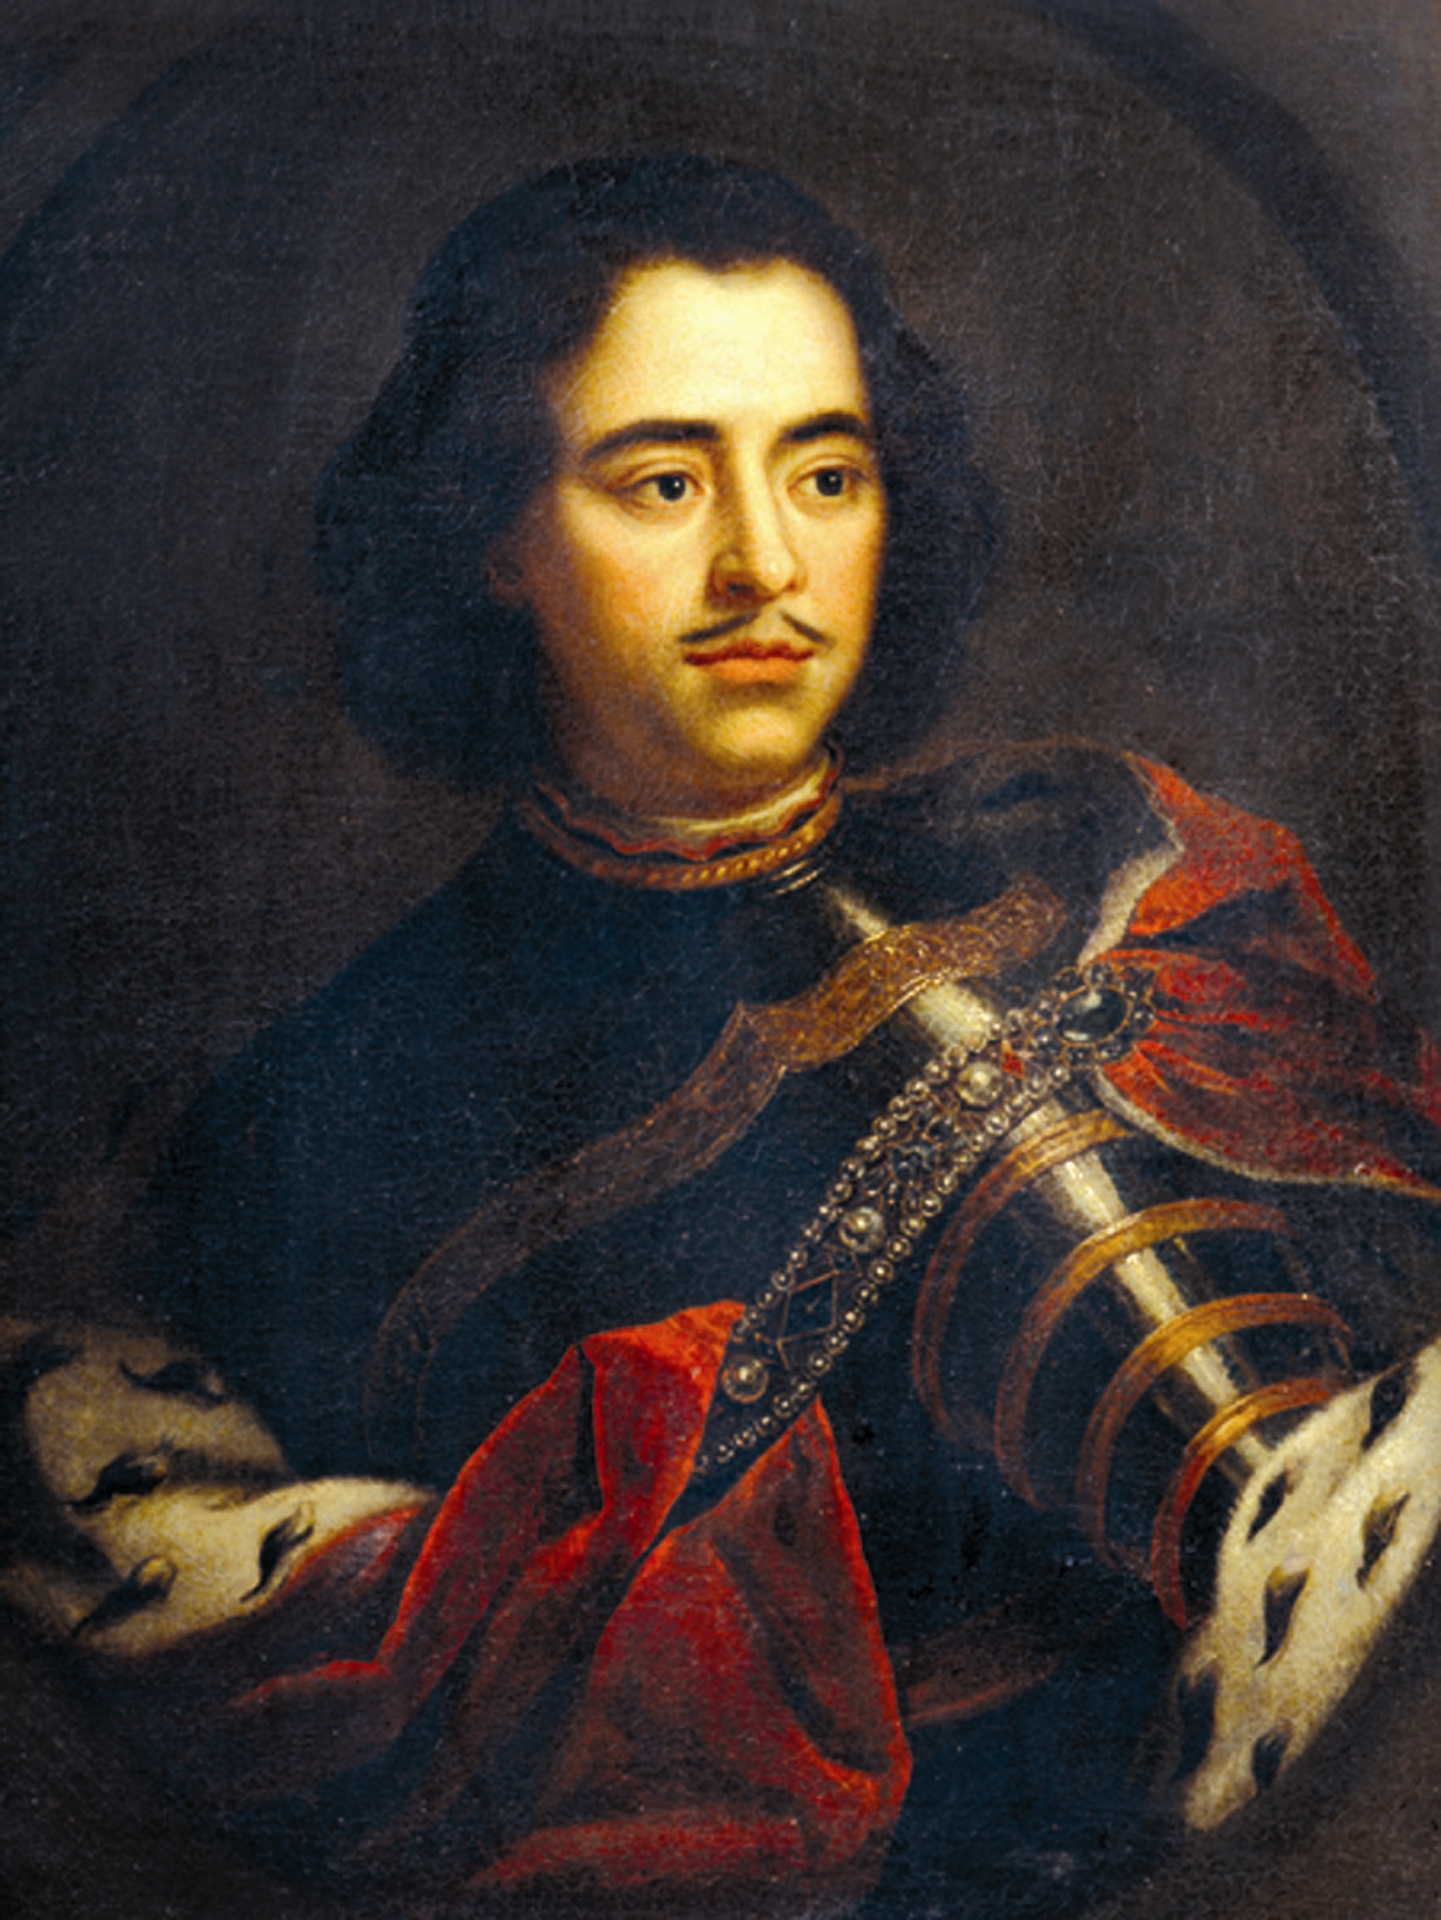 Peter 1 peter the great